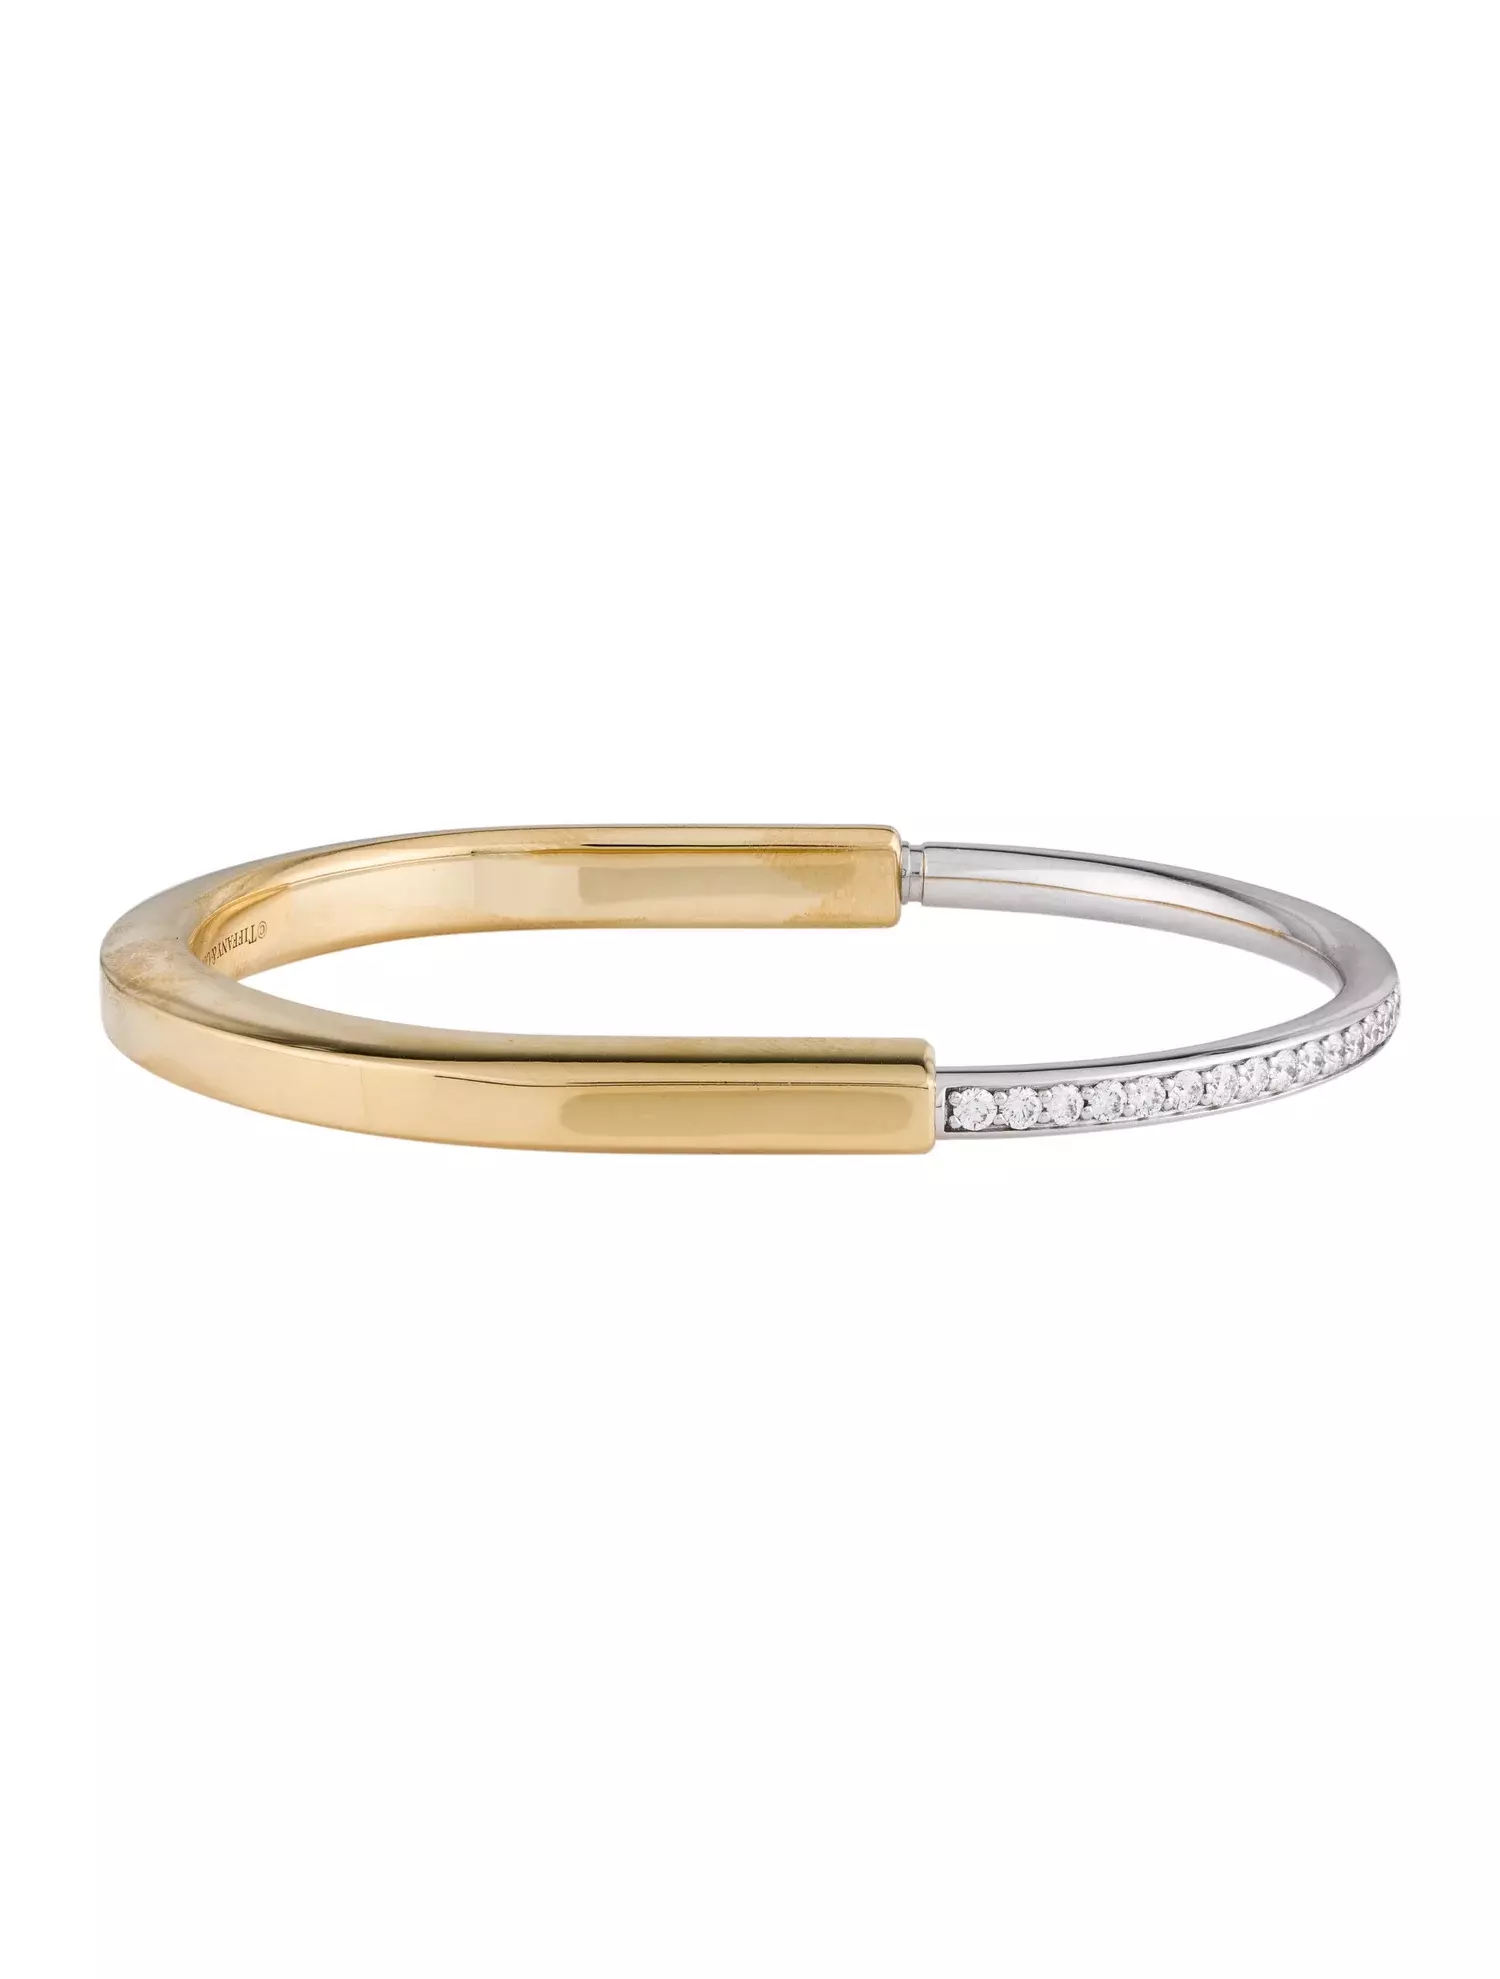 Tiffany Co. Lock Bangle in Yellow and White Gold with Half Pave Diamonds